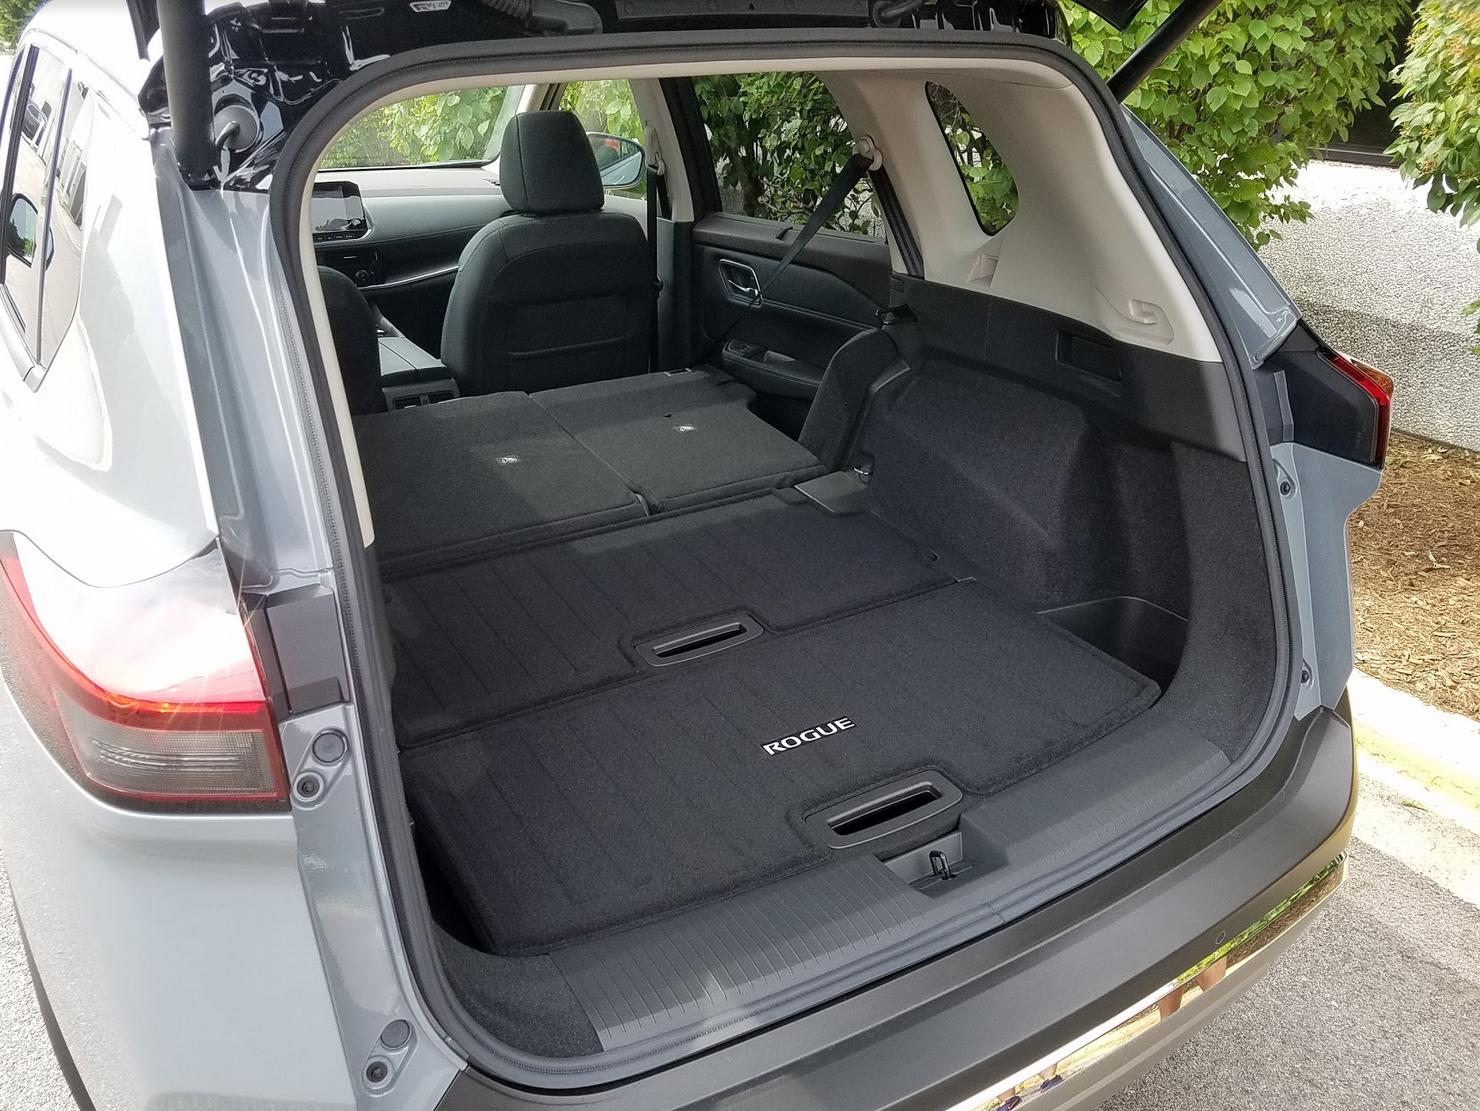 In addition to a spacious back-seat area, the Rogue’s rear doors are generously sized, and they open to almost 90 degrees. This makes entry and exit a breeze, and also makes it easier to get the little ones in and out of their car seats. Pull-up sunshades in the rear doors are another nice touch.